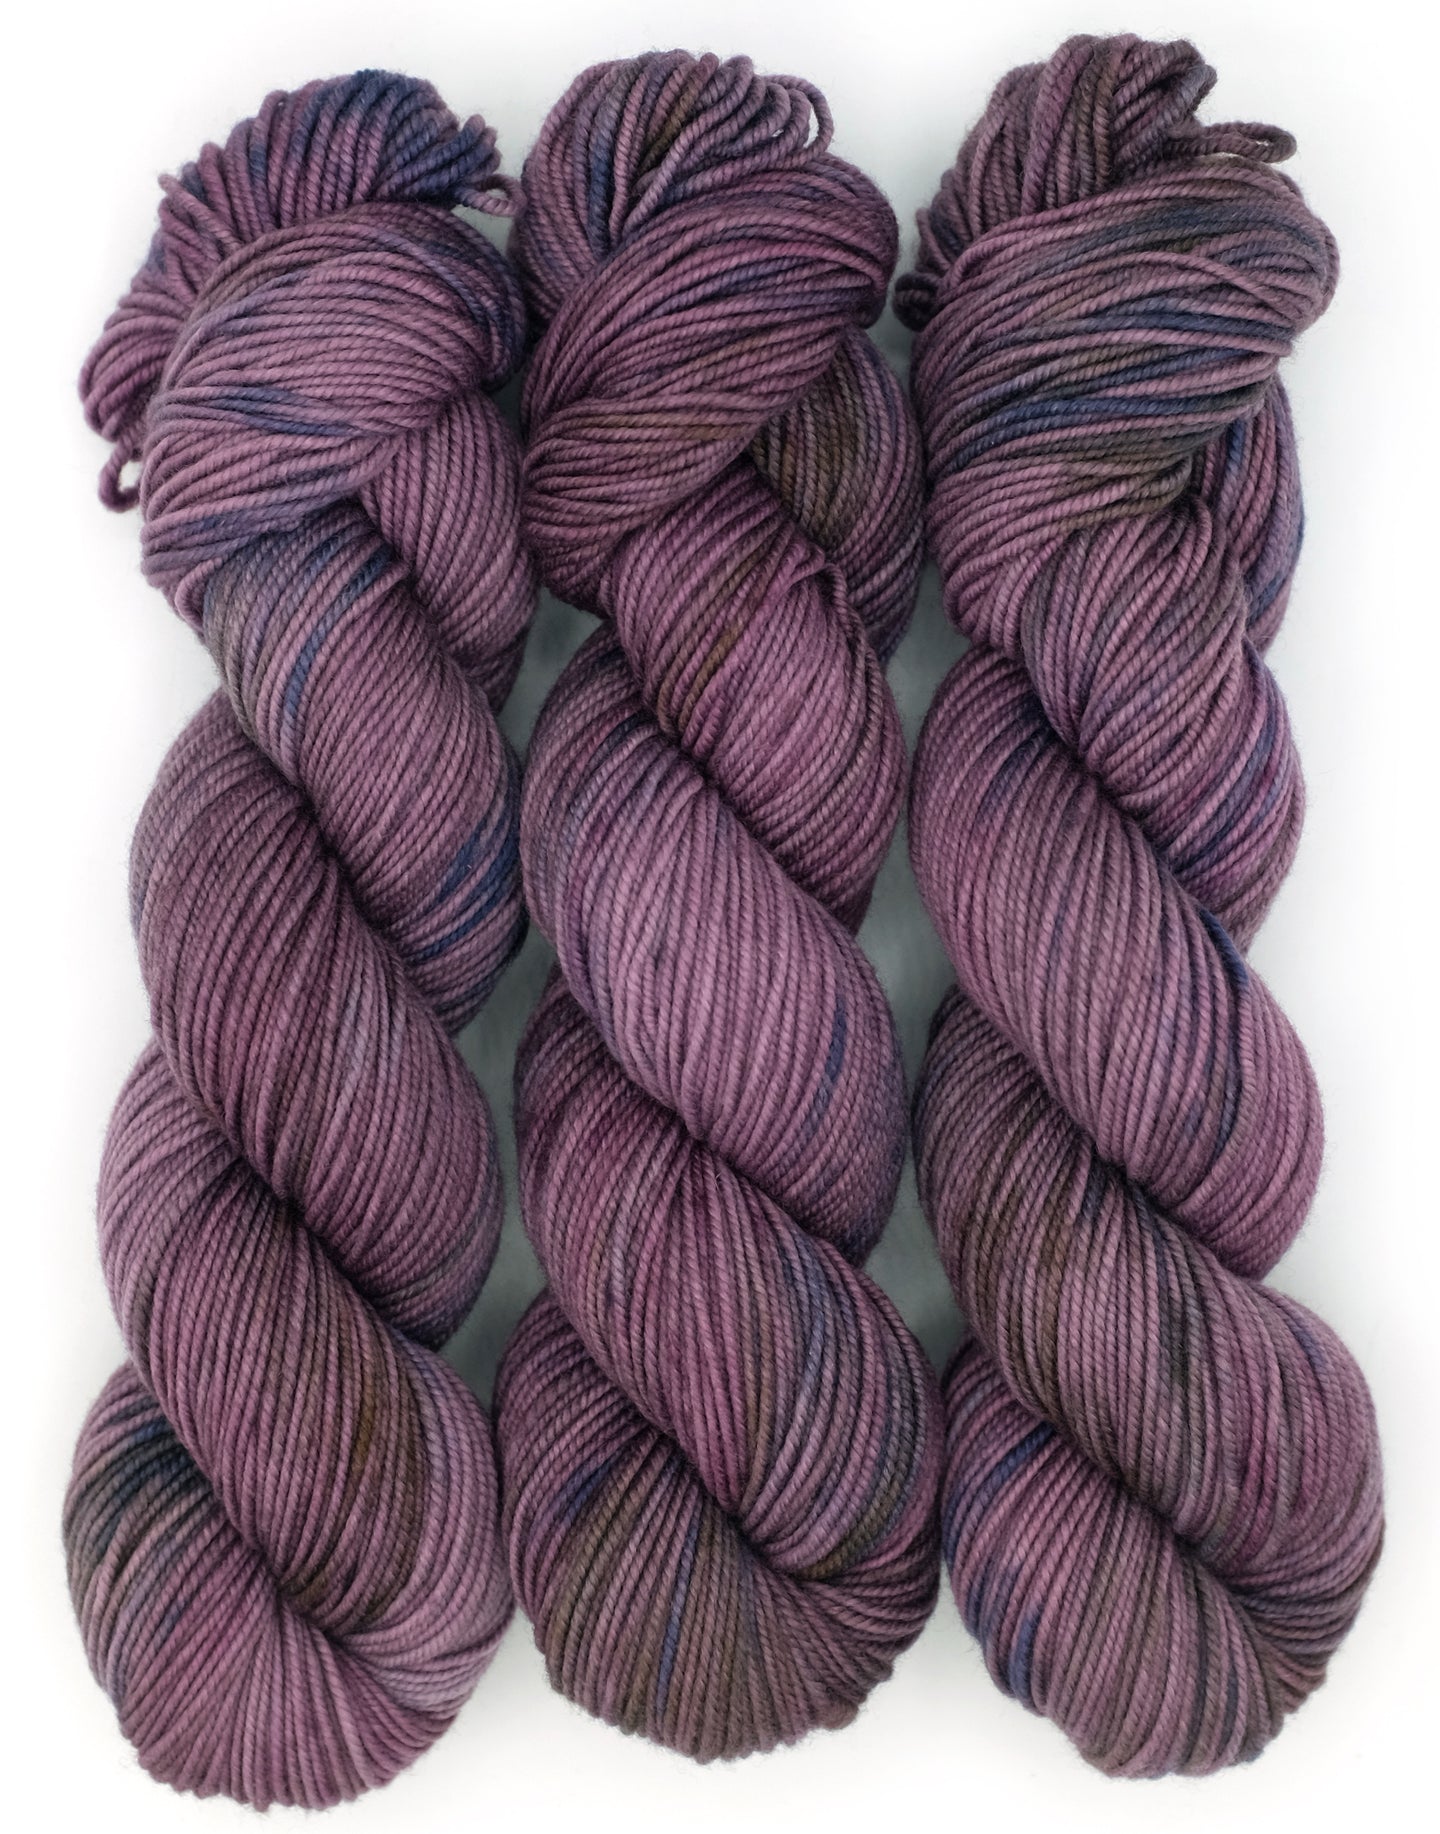 Ordinary Evils -- Shelley Base (NSW Worsted)